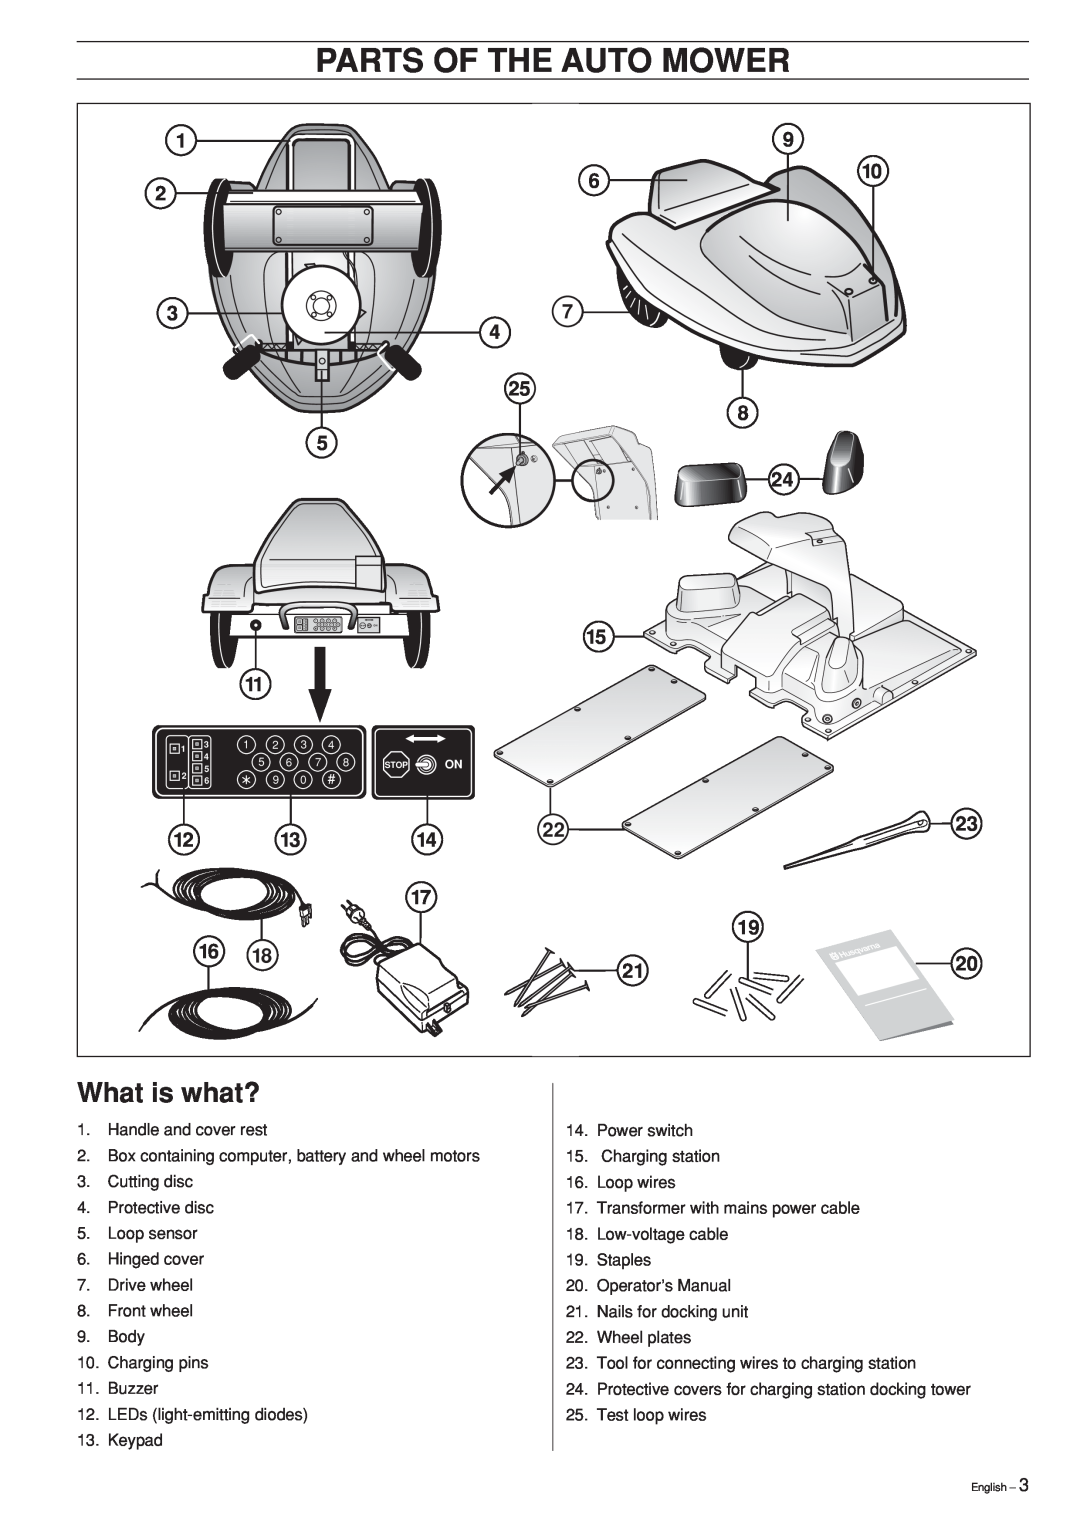 Husqvarna Robotic Lawn Mower manual Parts Of The Auto Mower, What is what? 